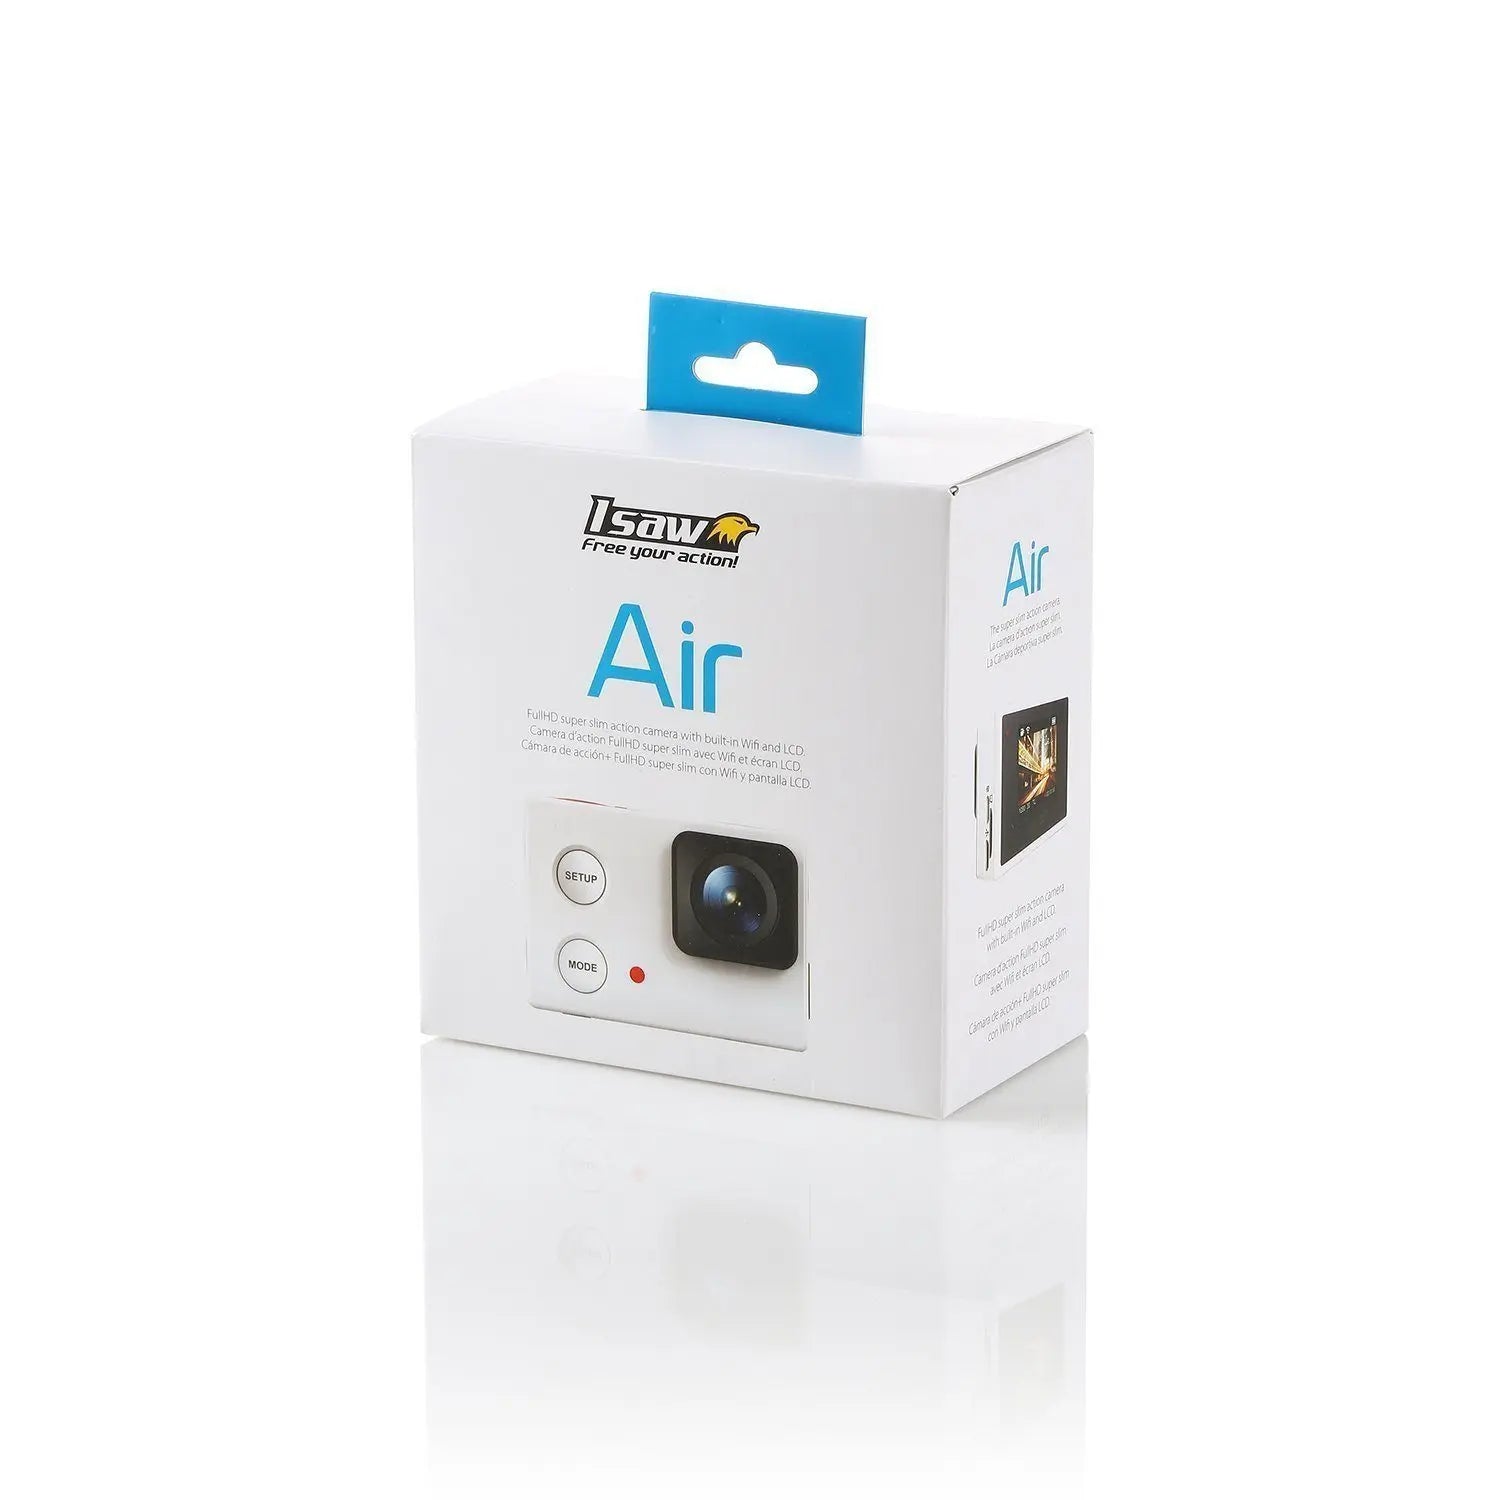 ISAW Air WiFi Action Camera – Pathpavers